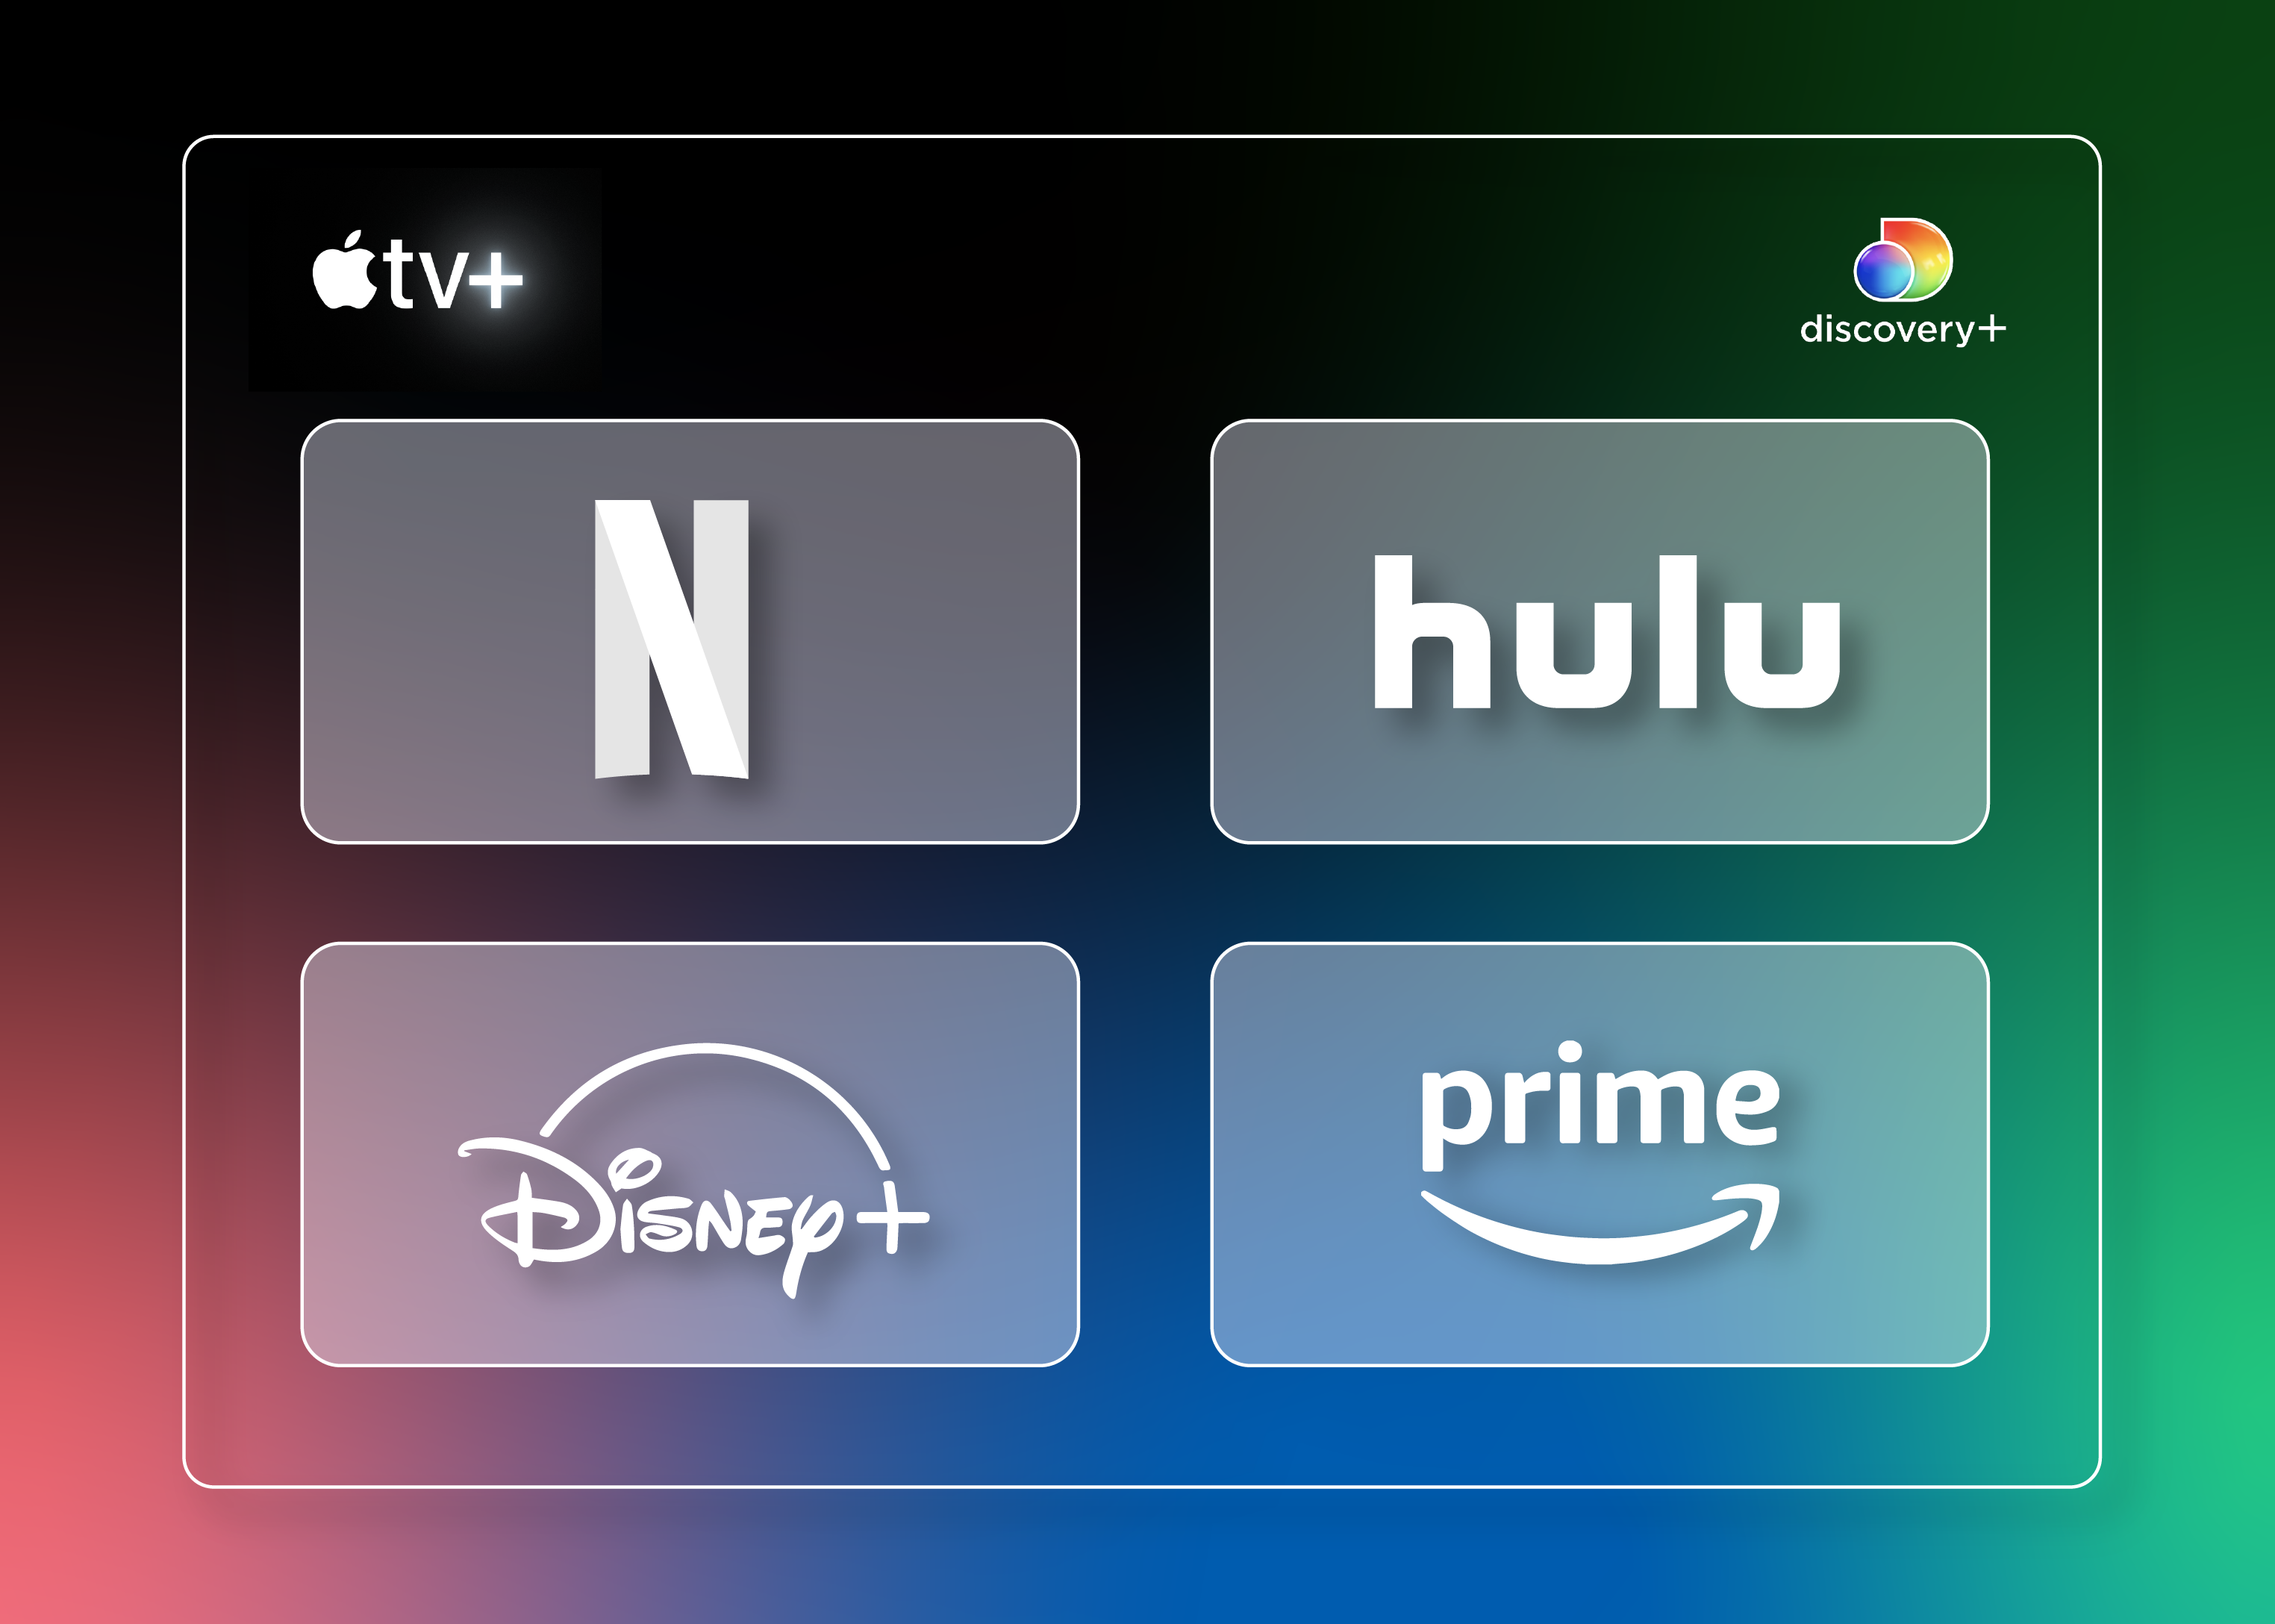 2 in 5 Apple TV+ subscribers also immersed in Netflix content.